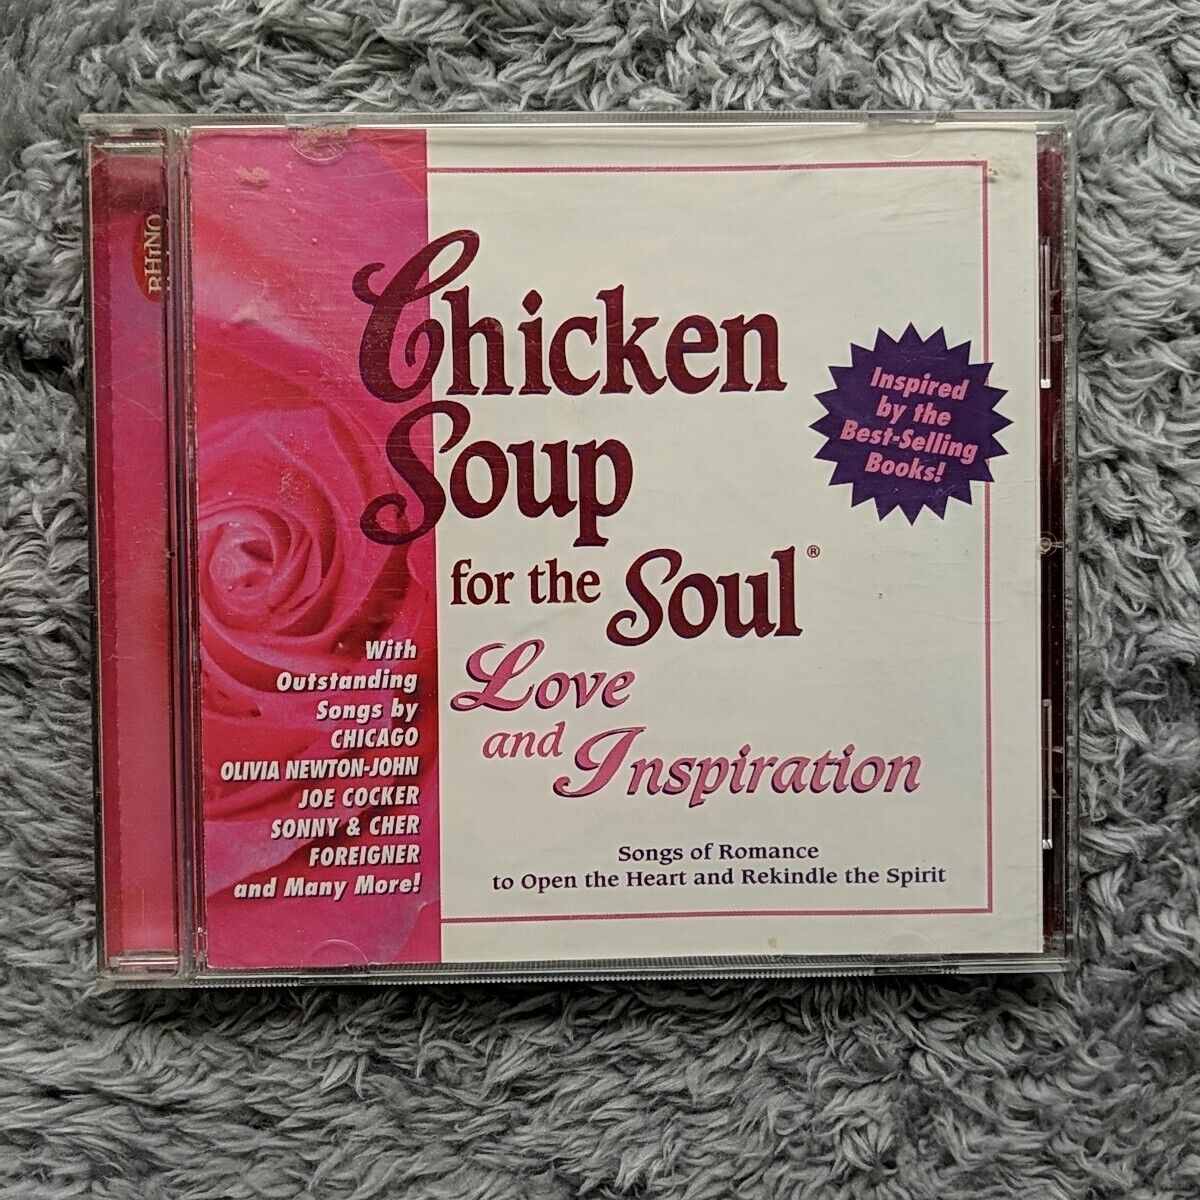 Chicken Soup for the Soul: Love and Inspiration by Various Artists (CD,...